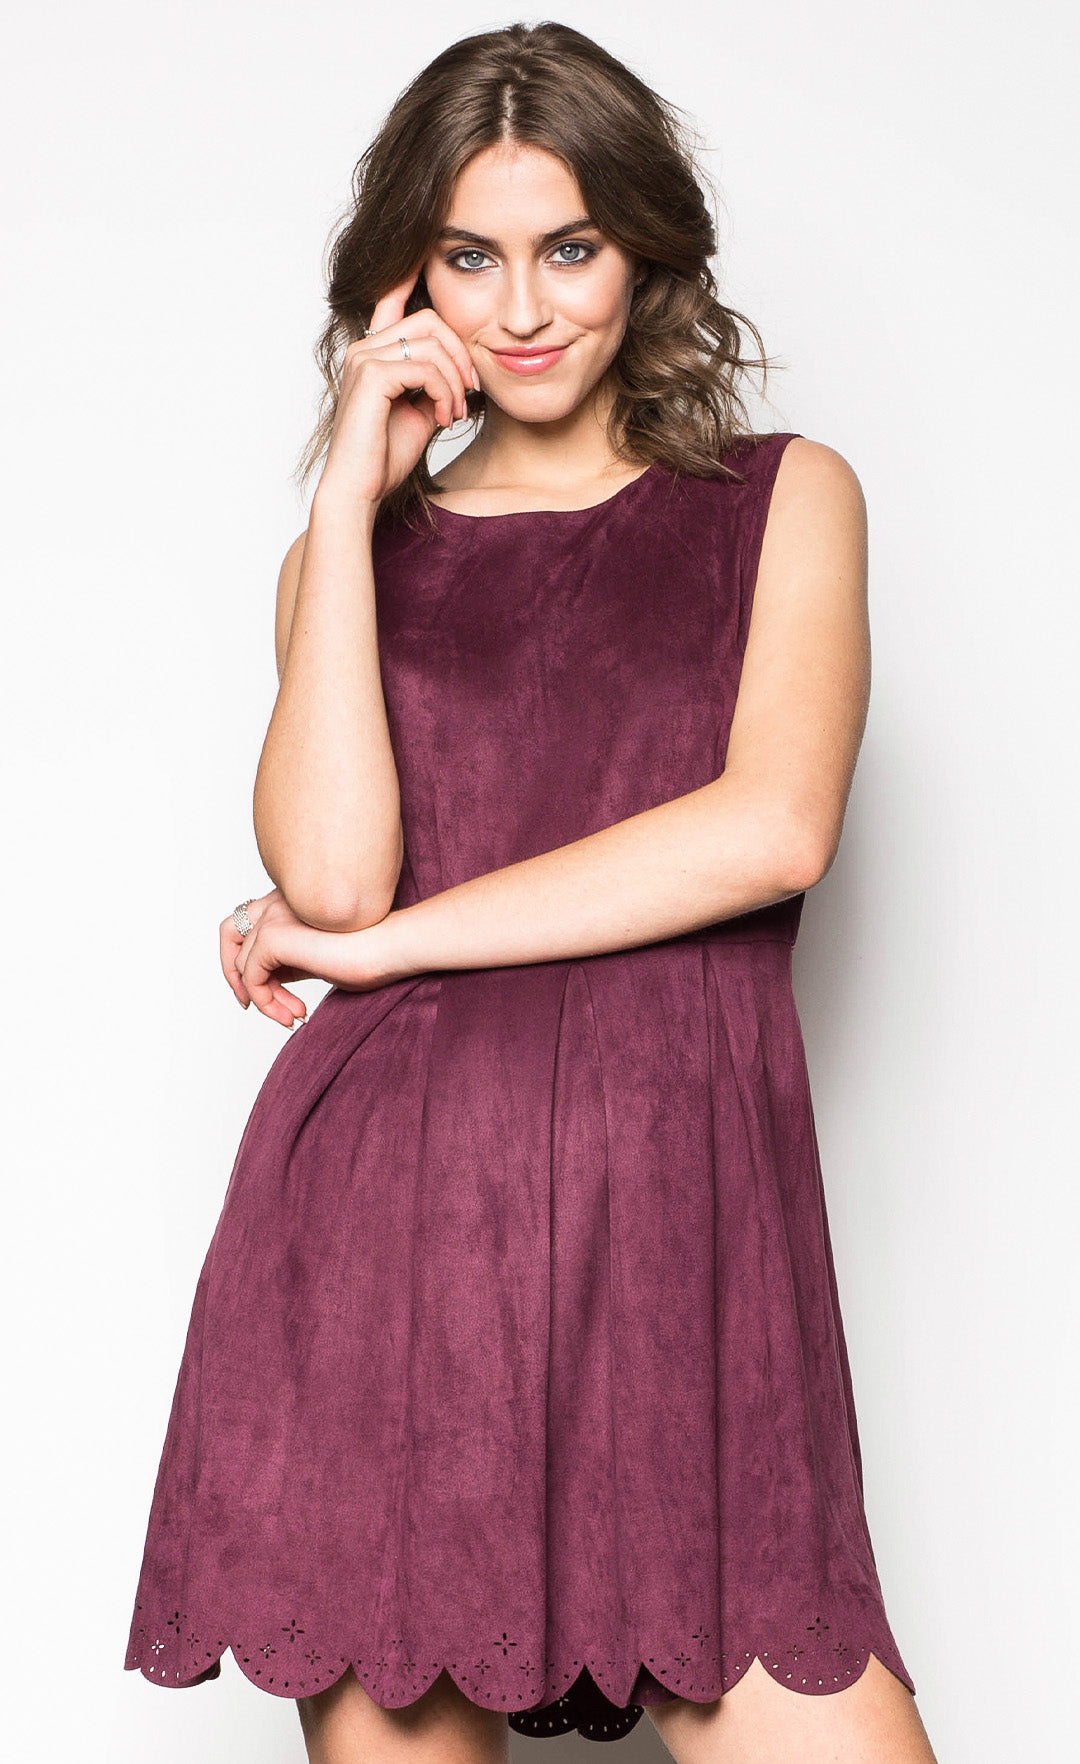 Persuede Me Dress - Pink Martini Collection